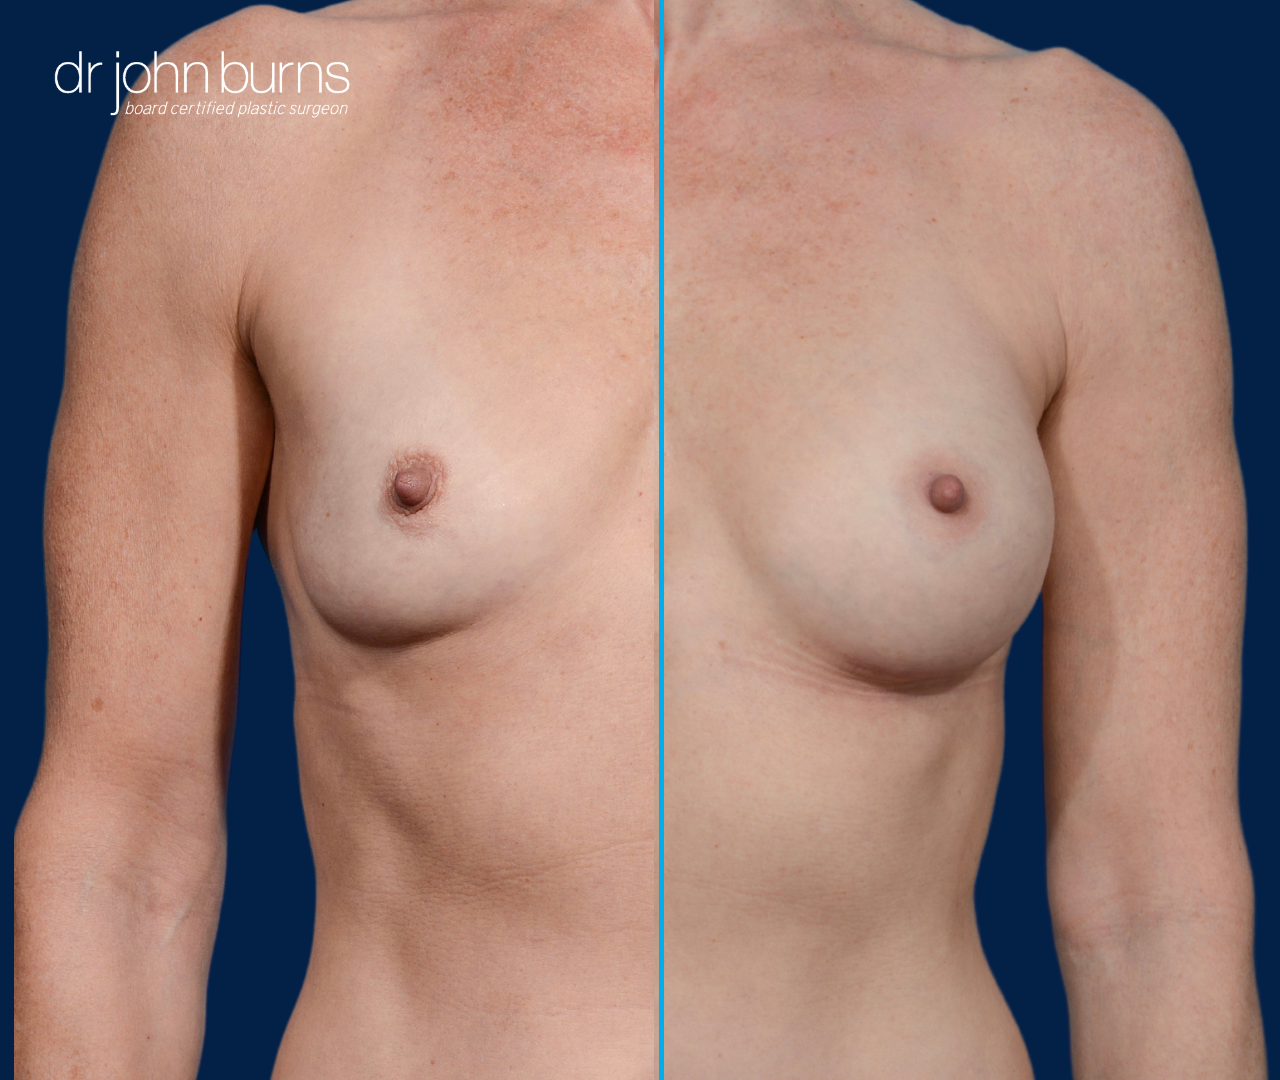 Breast Augmentation Results in Dallas, TX- Dr. John Burns.png__PID:a11c8403-93a4-49bf-9efa-aaf8c2ee1e29